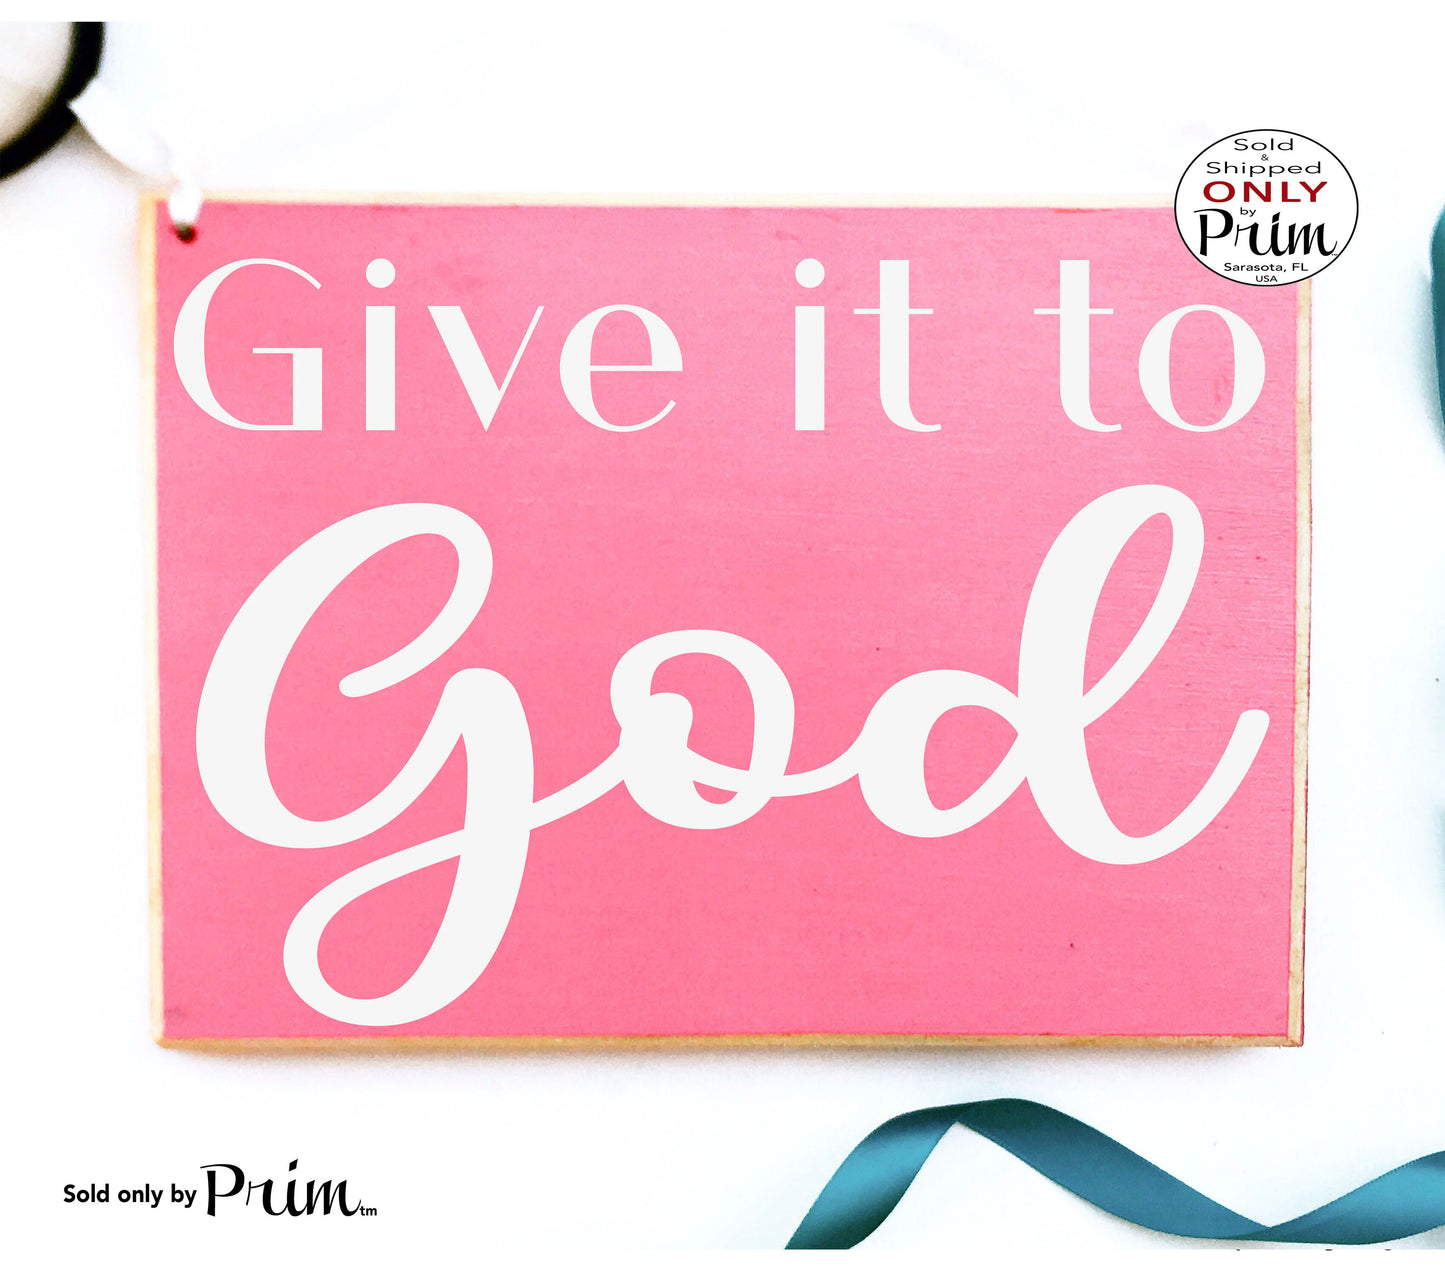 Give It To God Custom Wood Sign Motivational Inspirational High Hopes Never Gives Up Goals Religious Faith Belief Believe Plaque